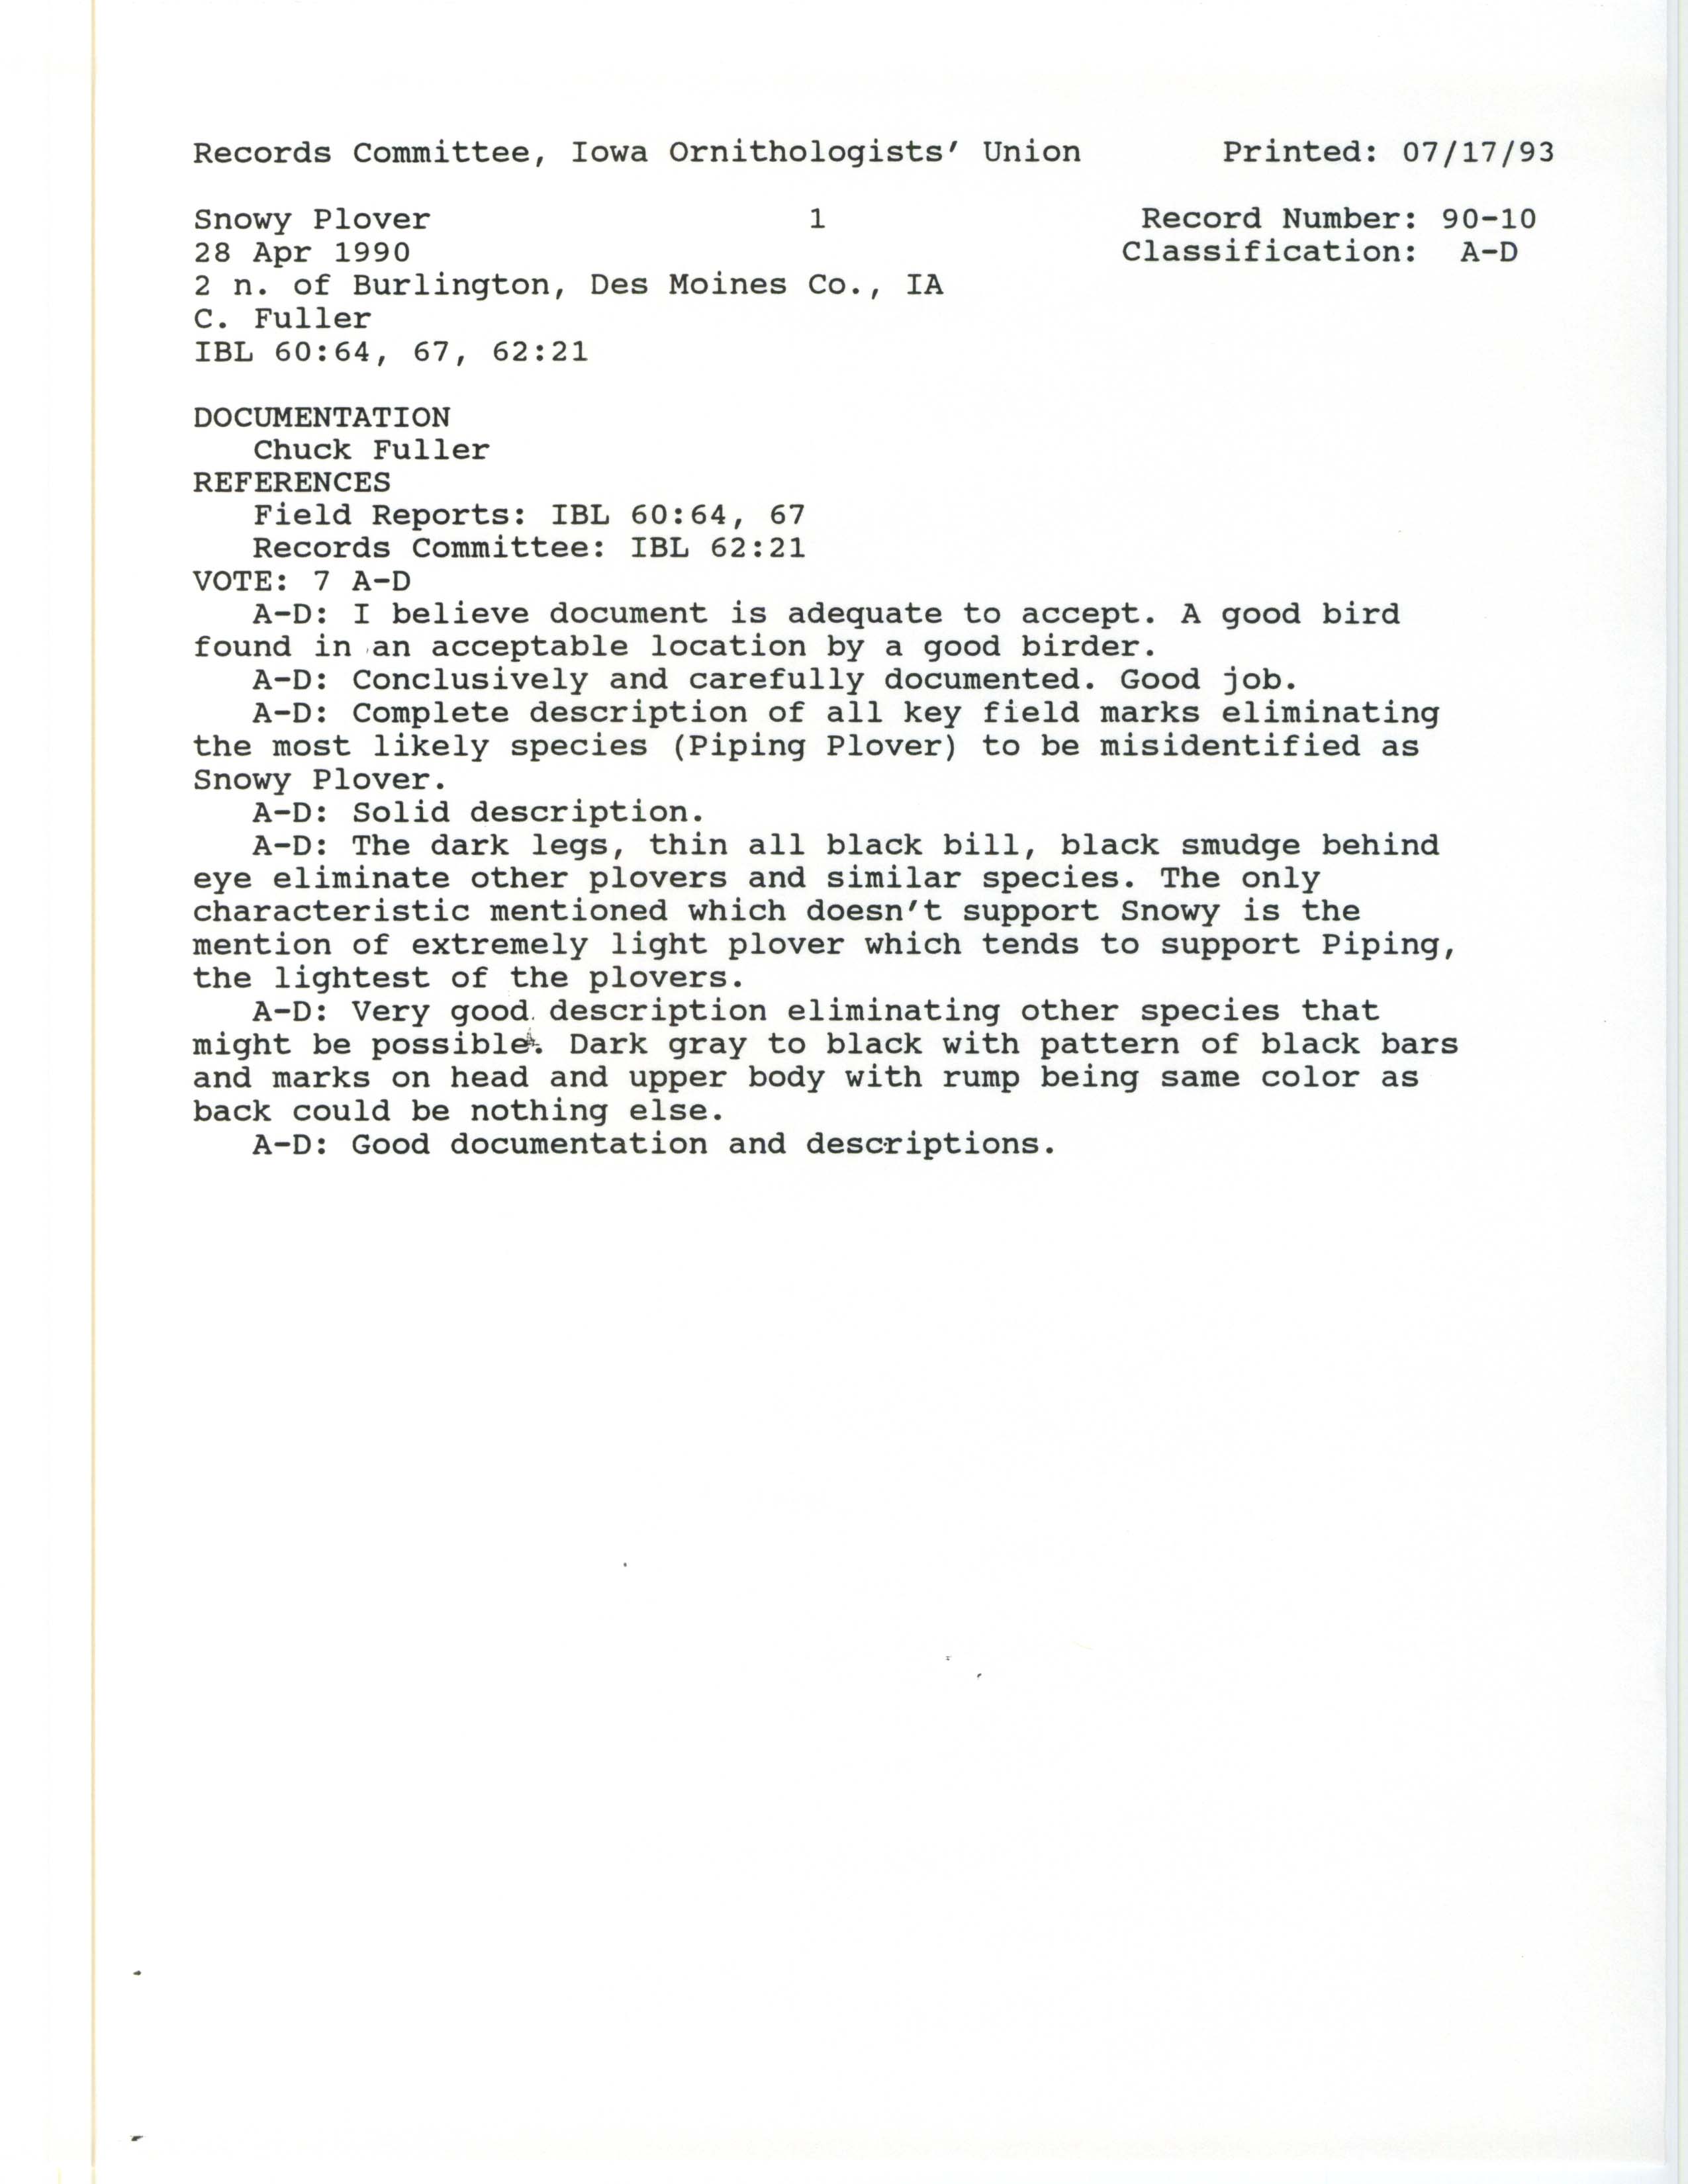 Records Committee review for rare bird sighting of Snowy Plover north of Burlington, 1990